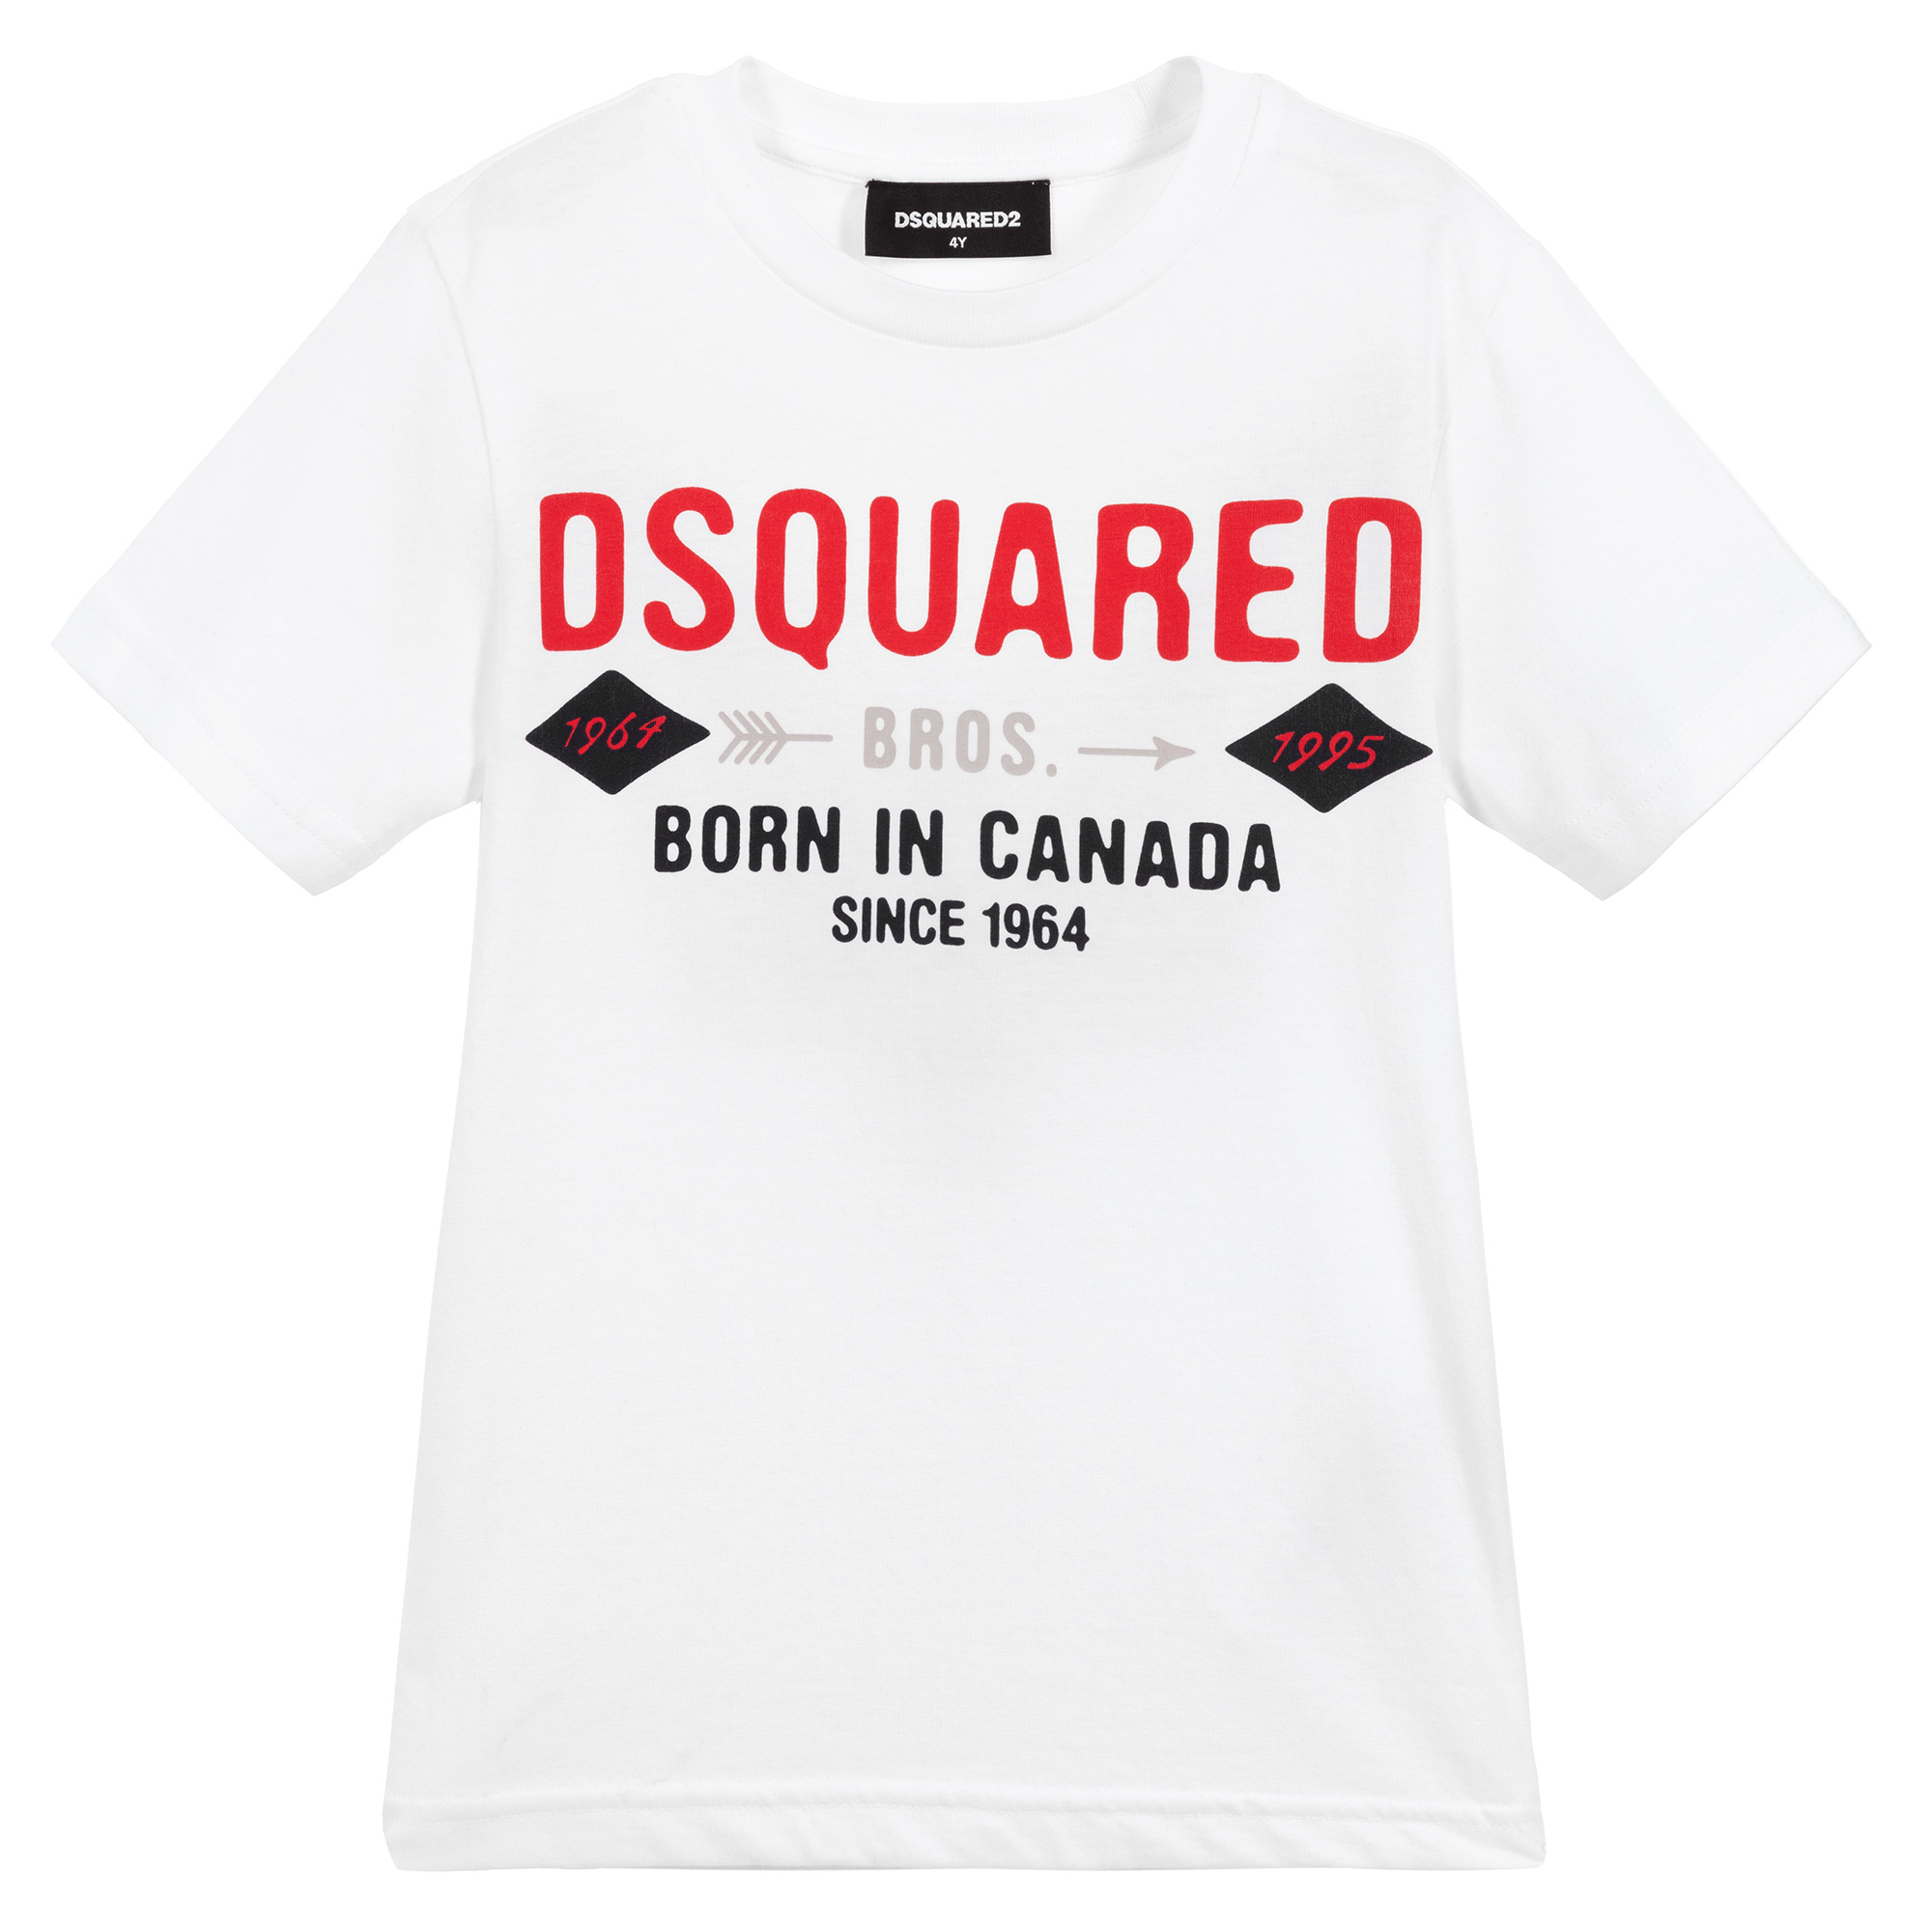 dsquared2 outlet canada